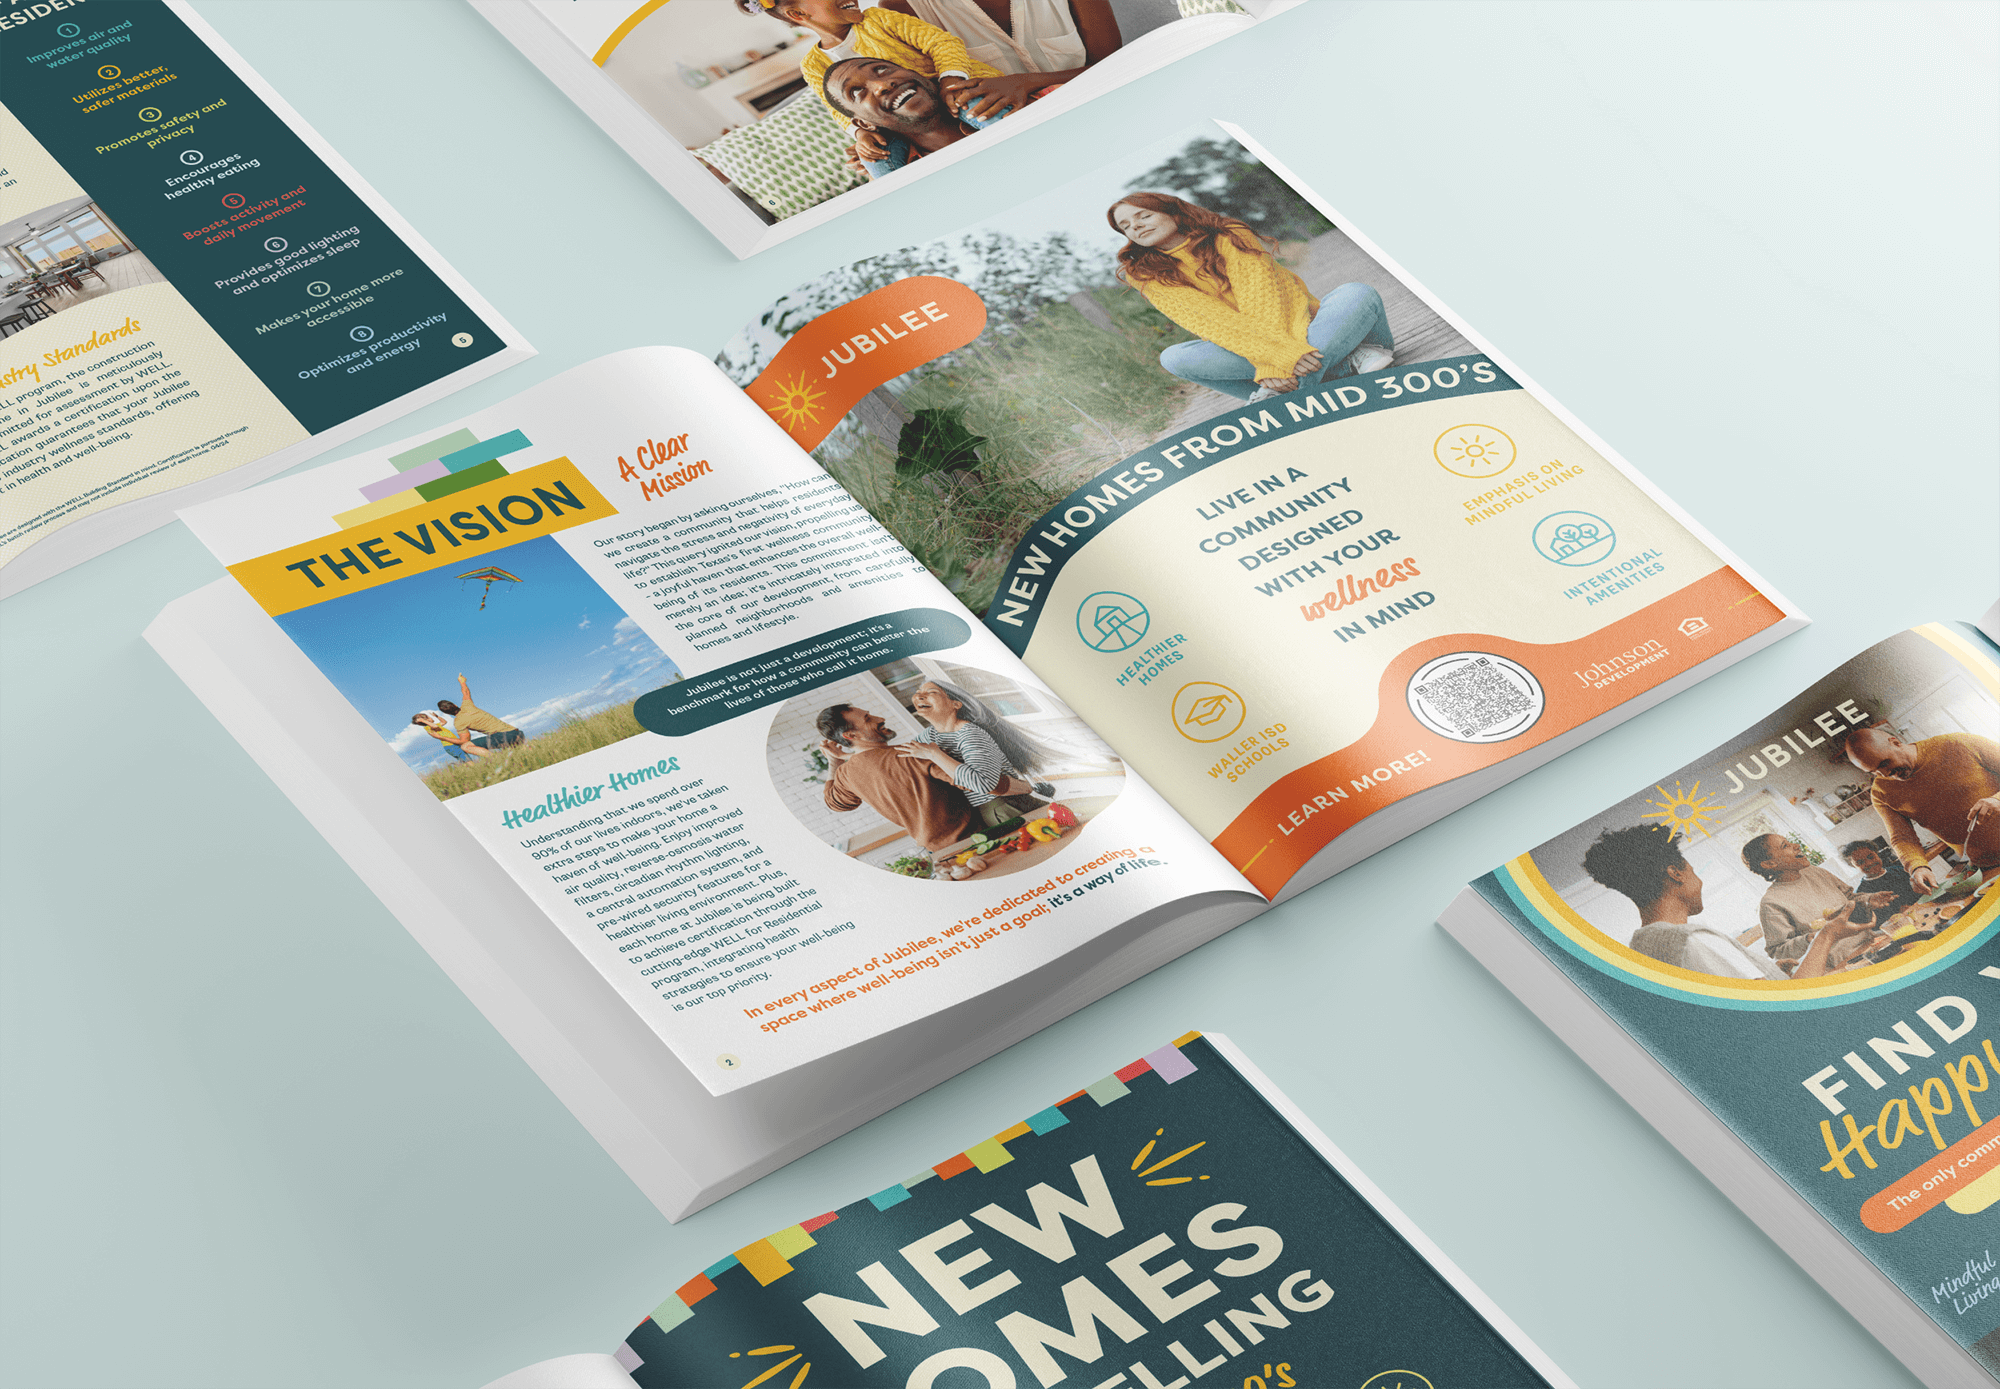 Jubilee print ad and magazine designs created by ST8MNT as part of print collateral project for master-planned community in Texas